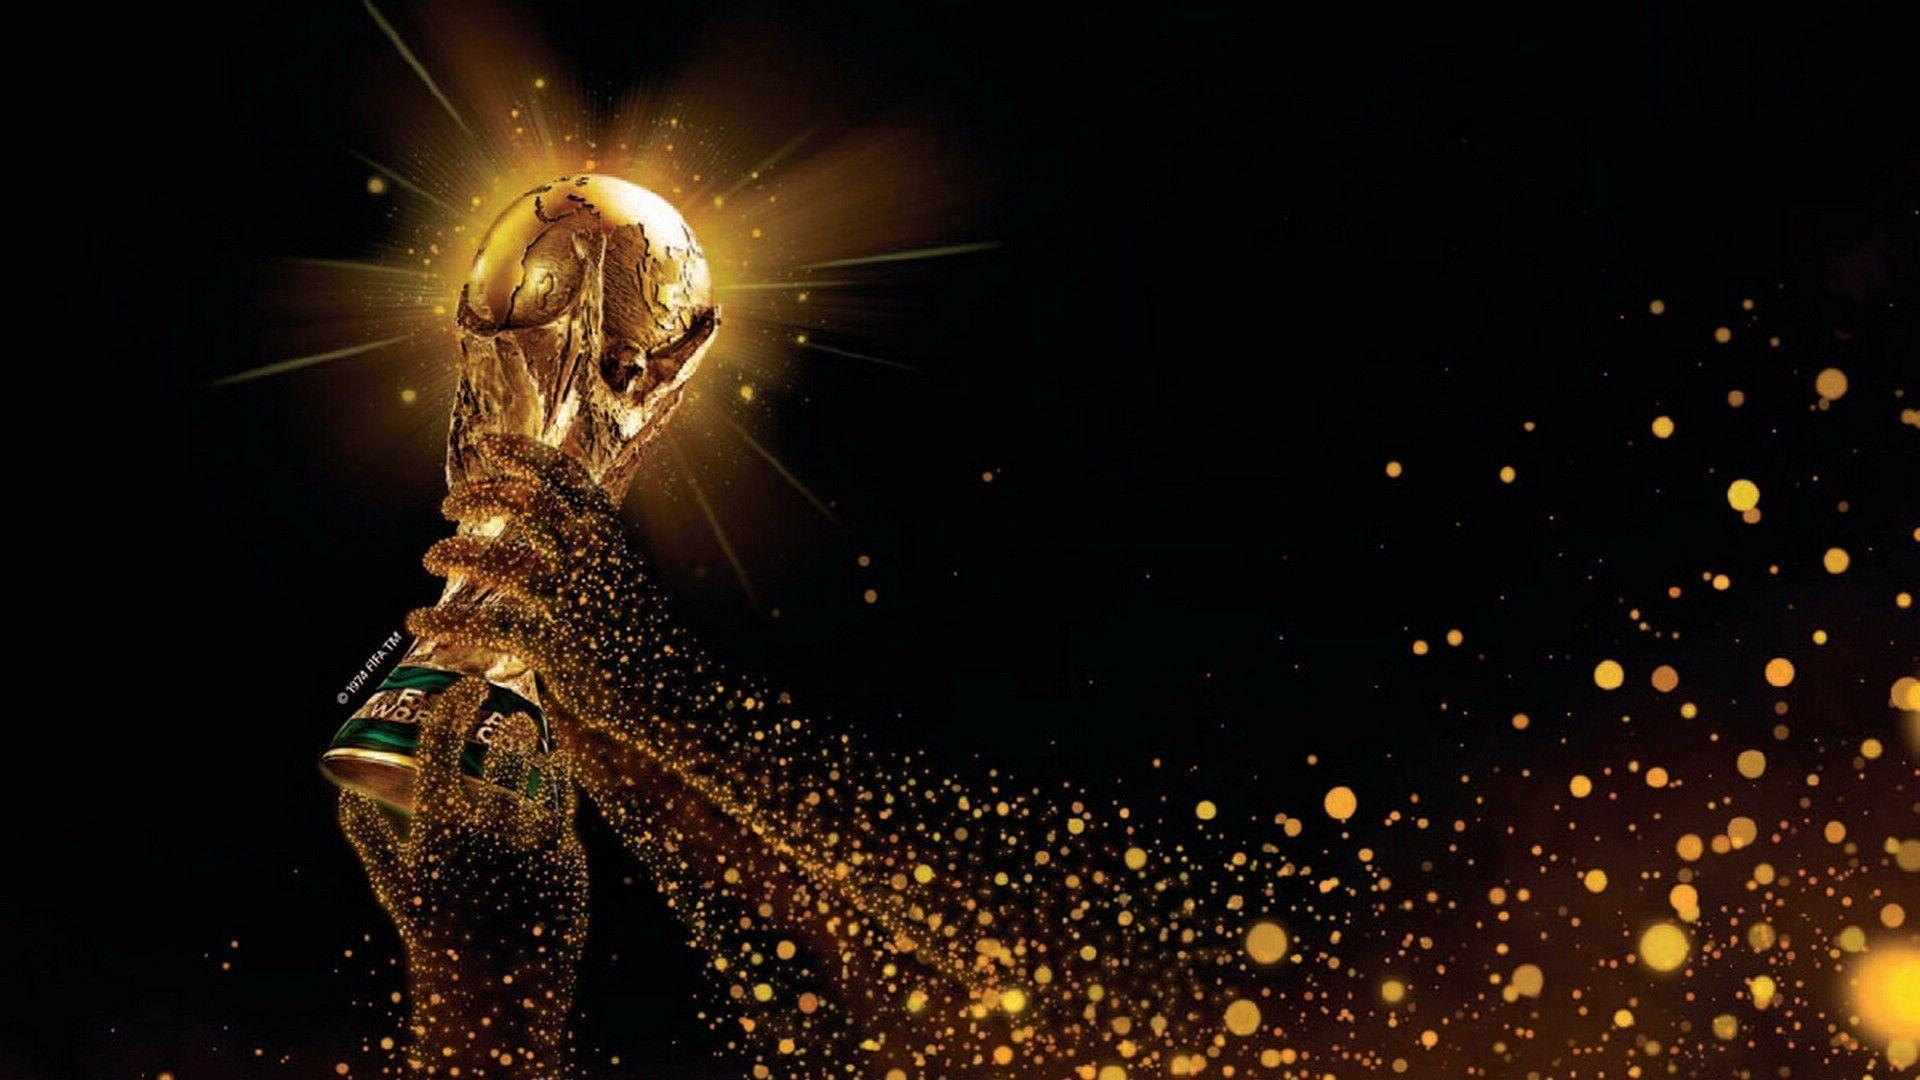 Fifa world cup 2018 Wallpapers